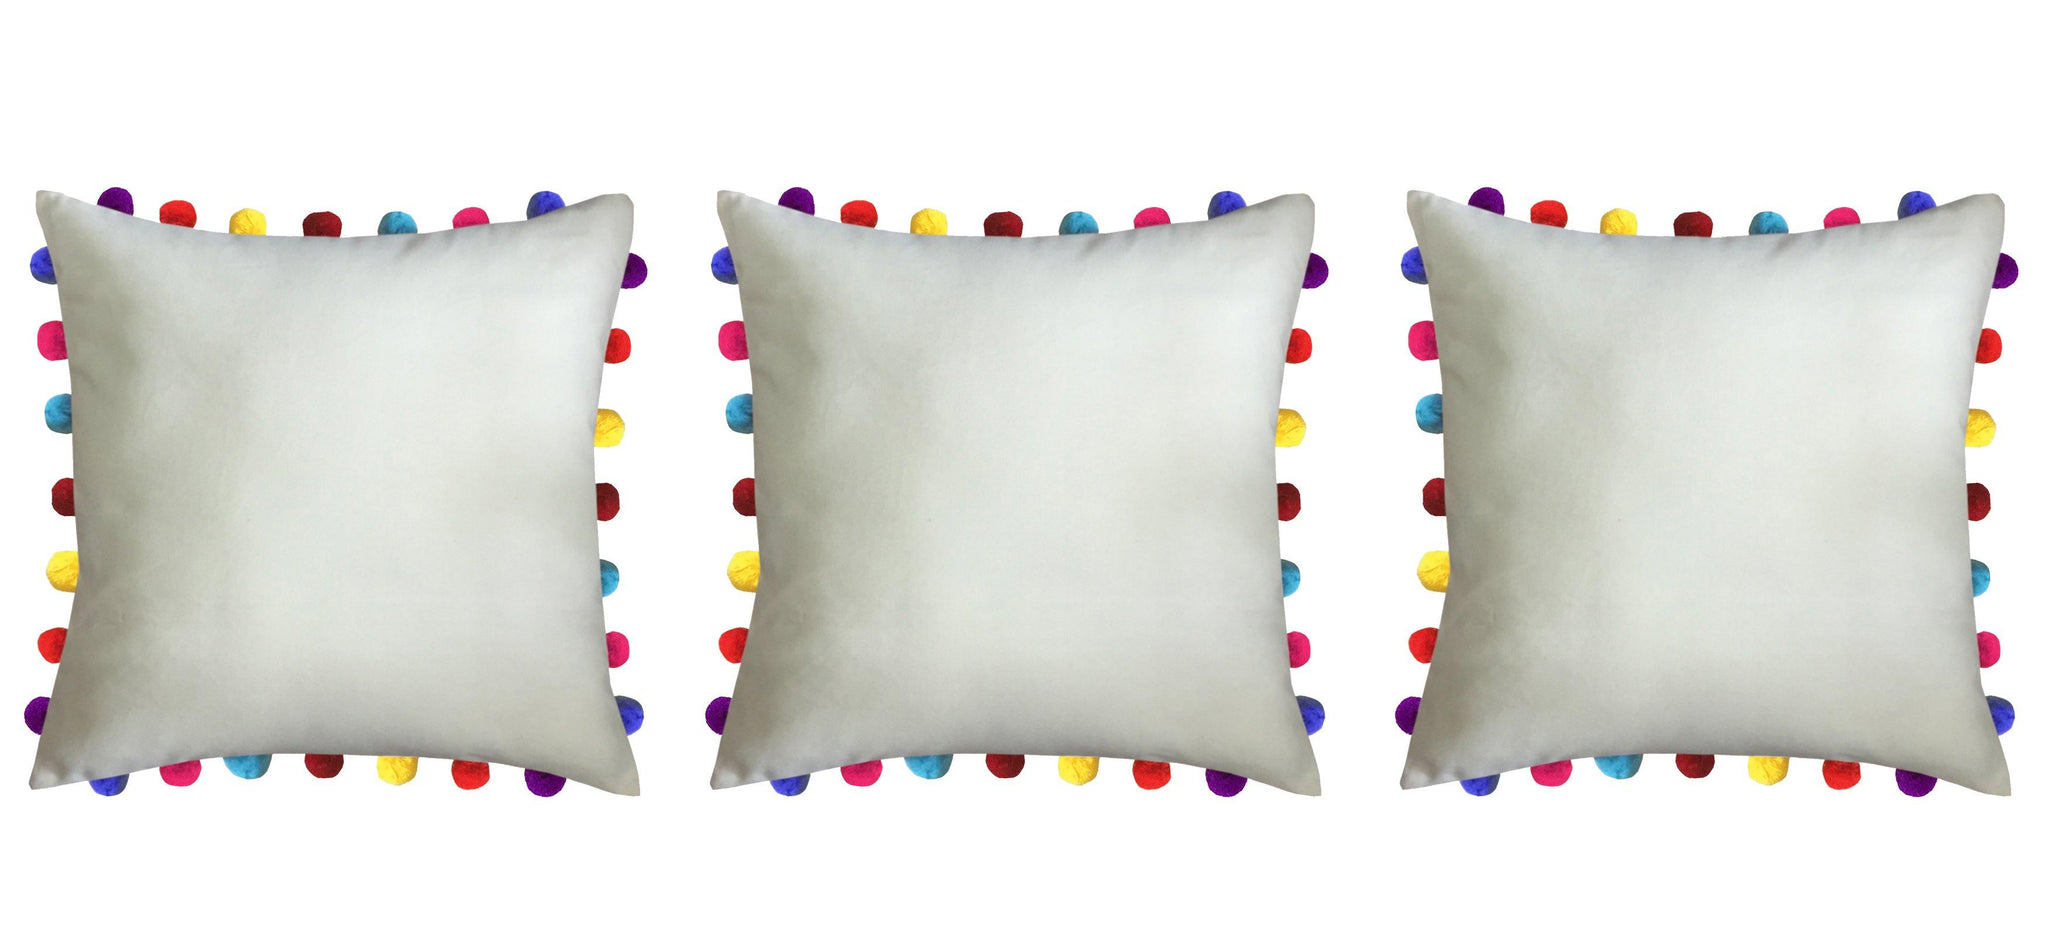 Lushomes Ecru Cushion Cover with Colorful Pom Poms (3 pcs, 20 x 20‰۝) 